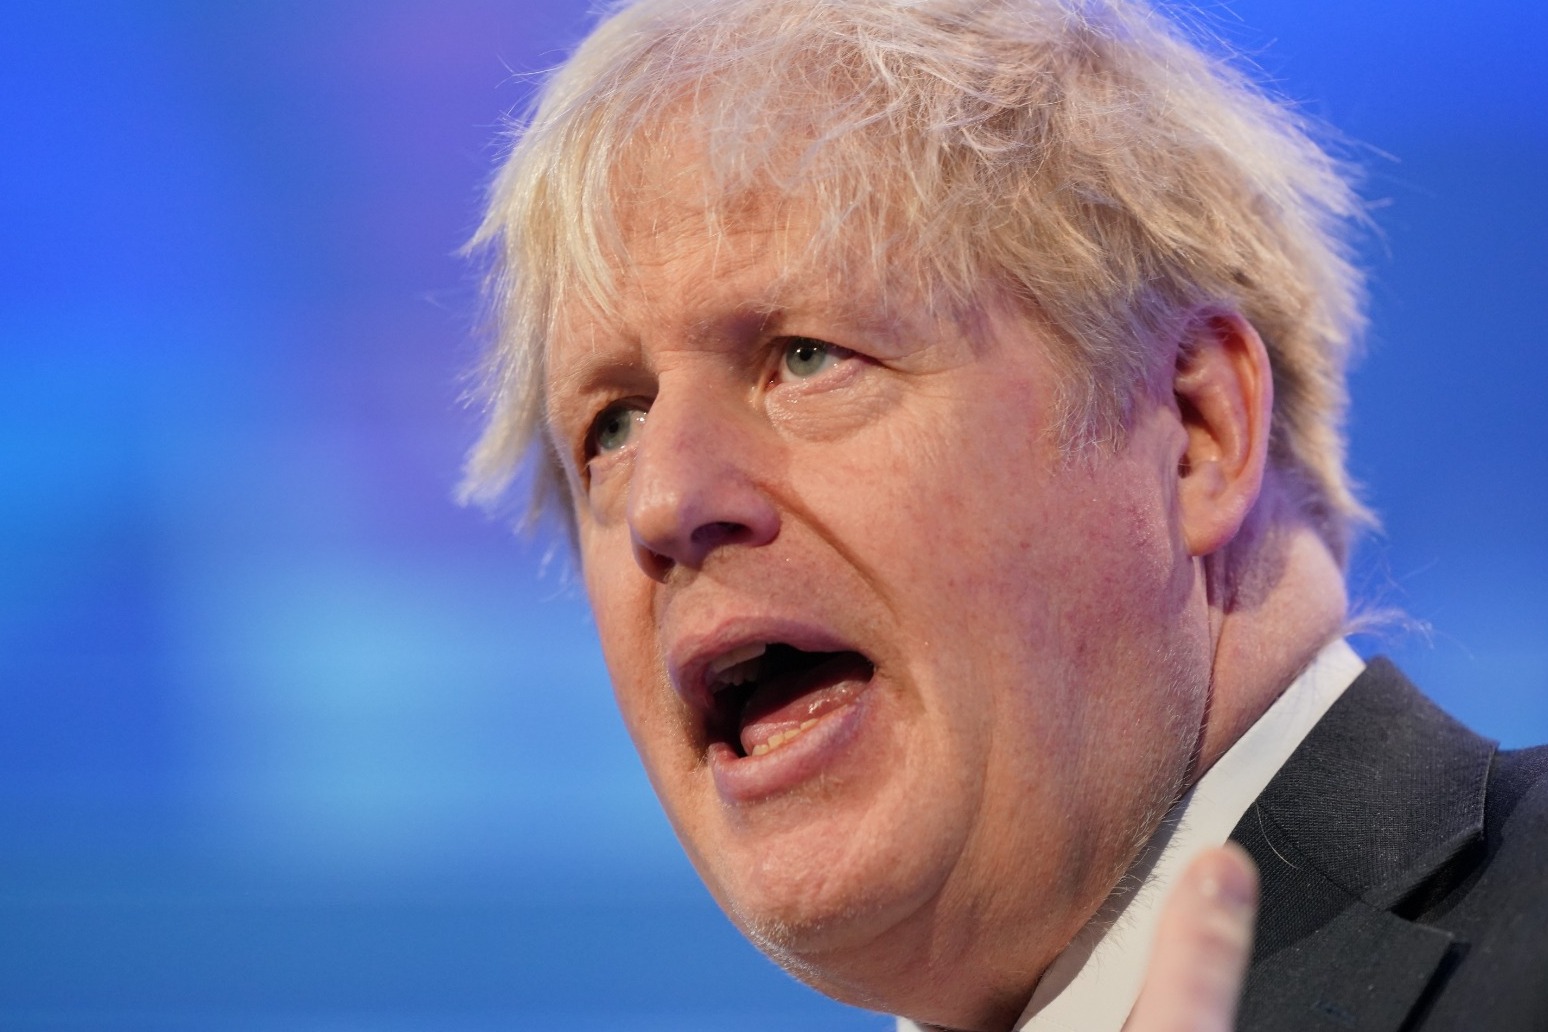 Johnson will offer ‘robust defence’ as he fights partygate claims, says Dowden 